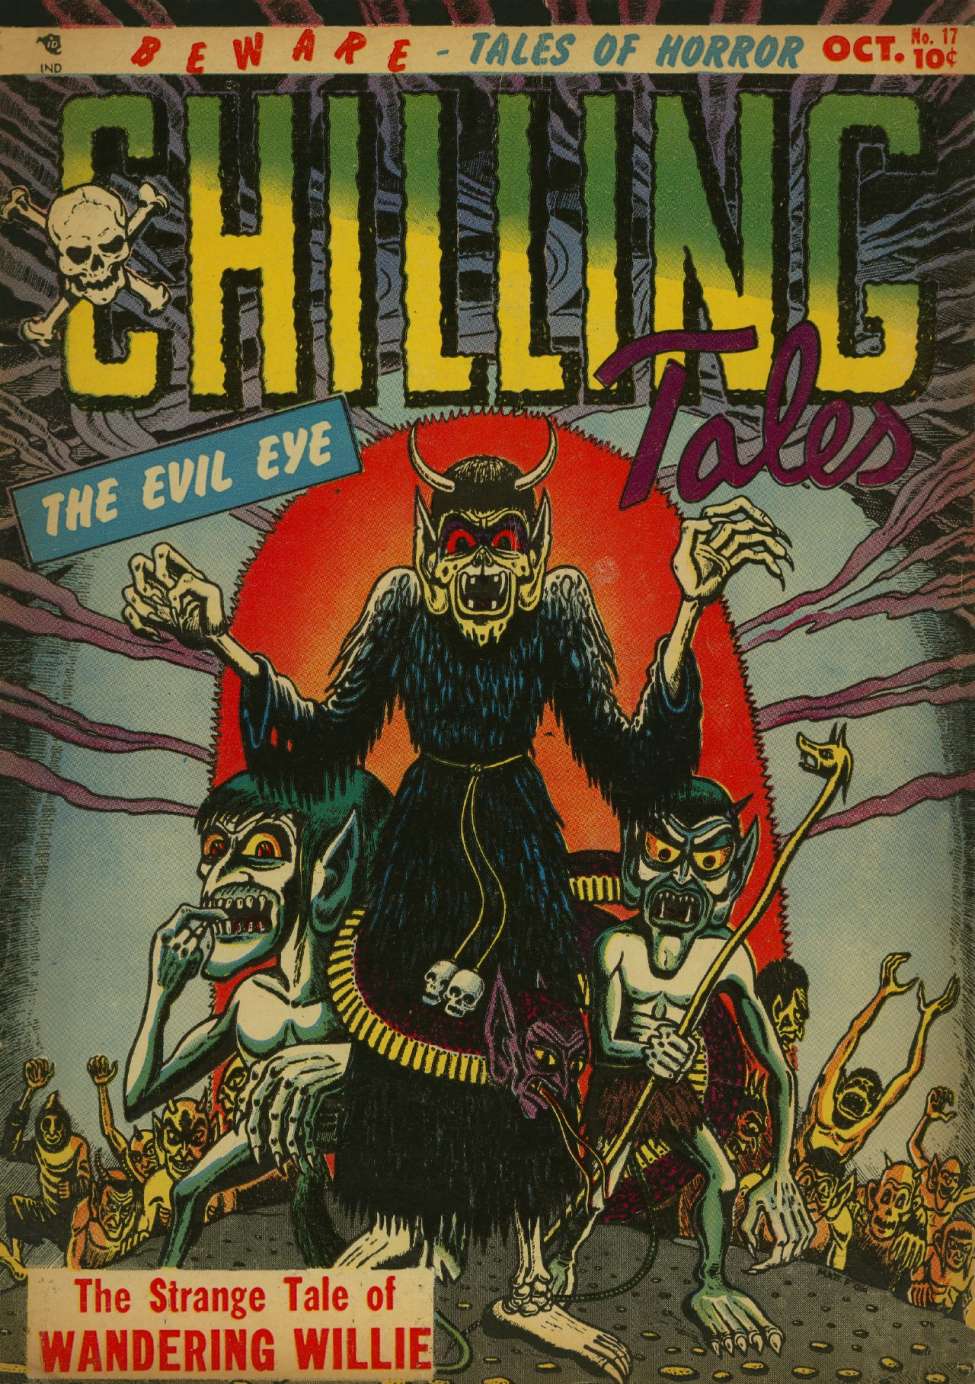 Book Cover For Chilling Tales 17